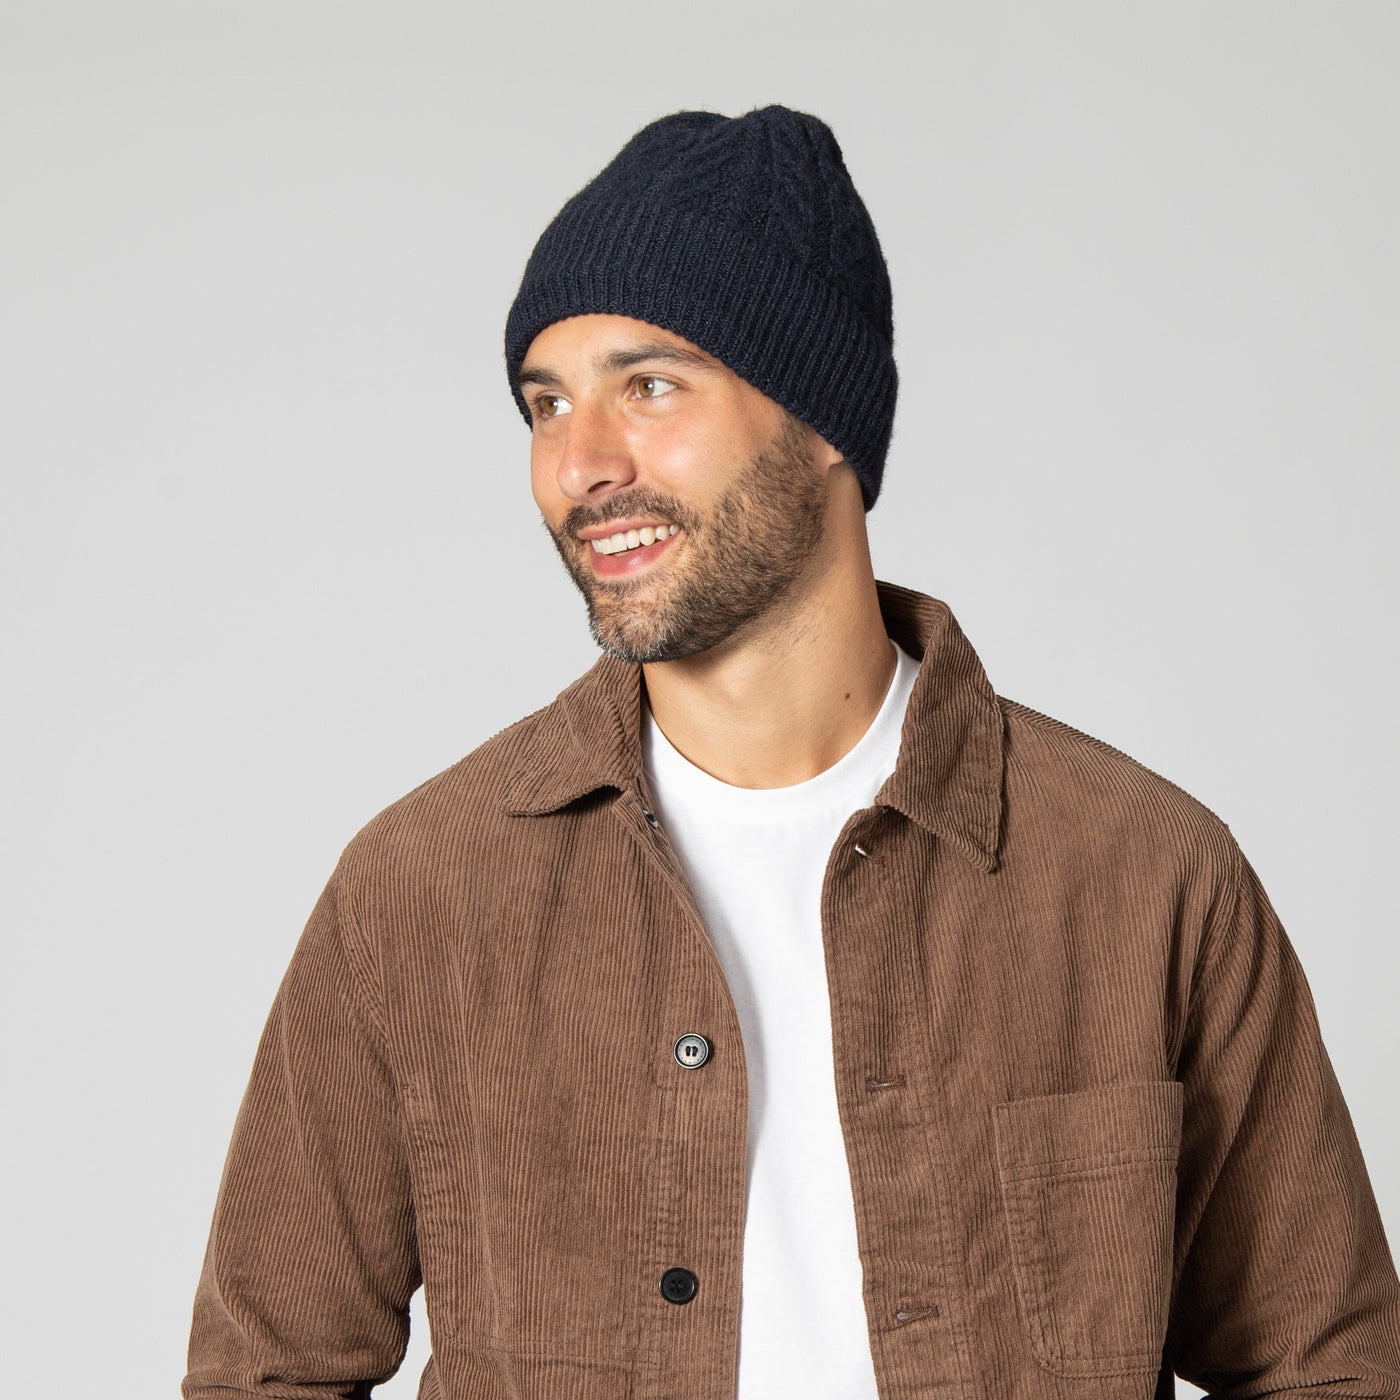 BEANIE - Men's Recycled Cable Knit Cuffed Beanie